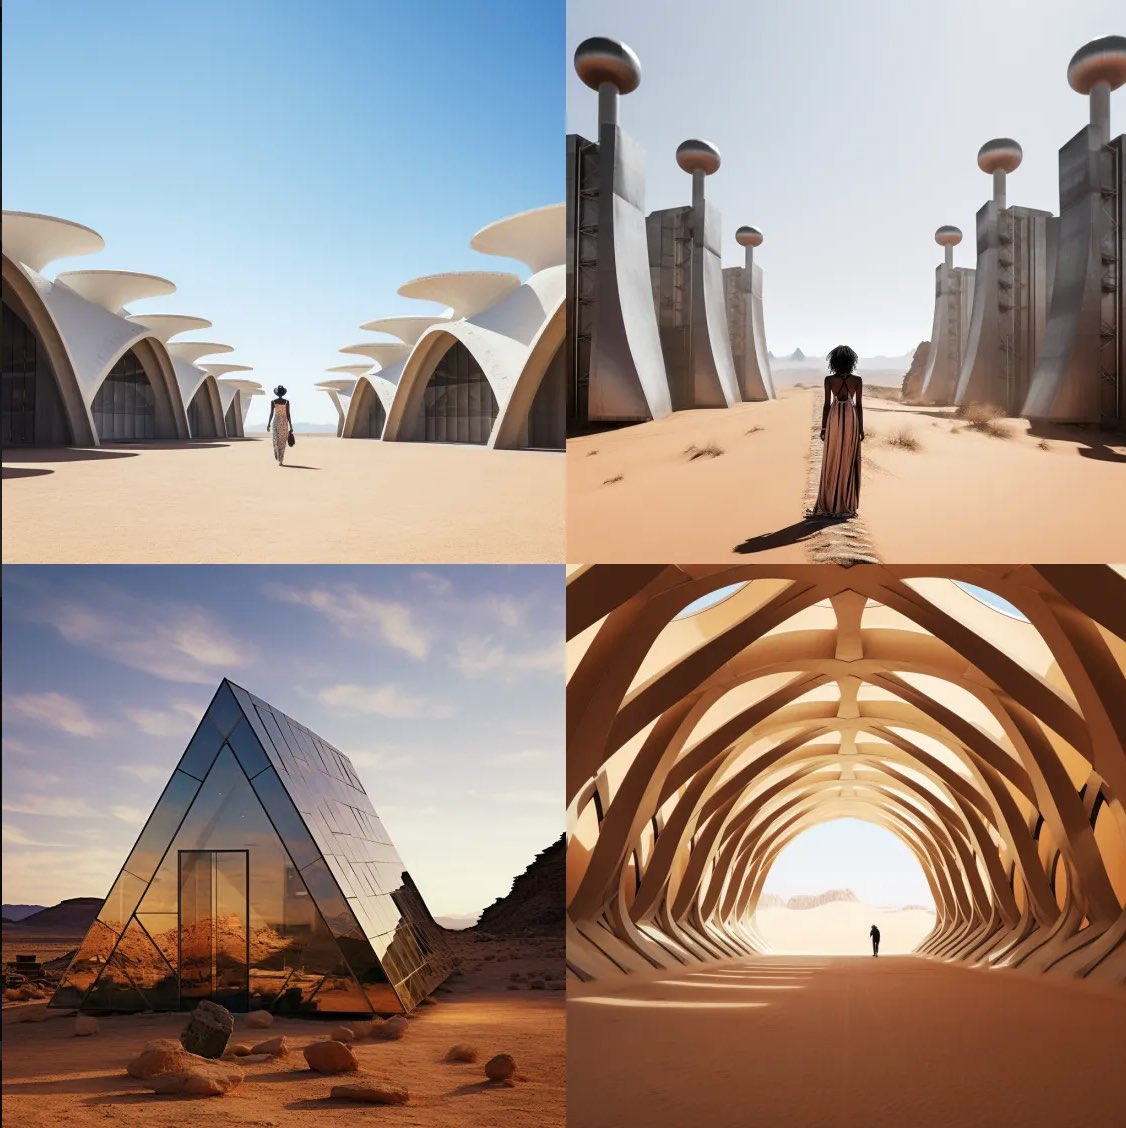 photography, Afrofuturism, architecture in the desert. Afrofuturismus